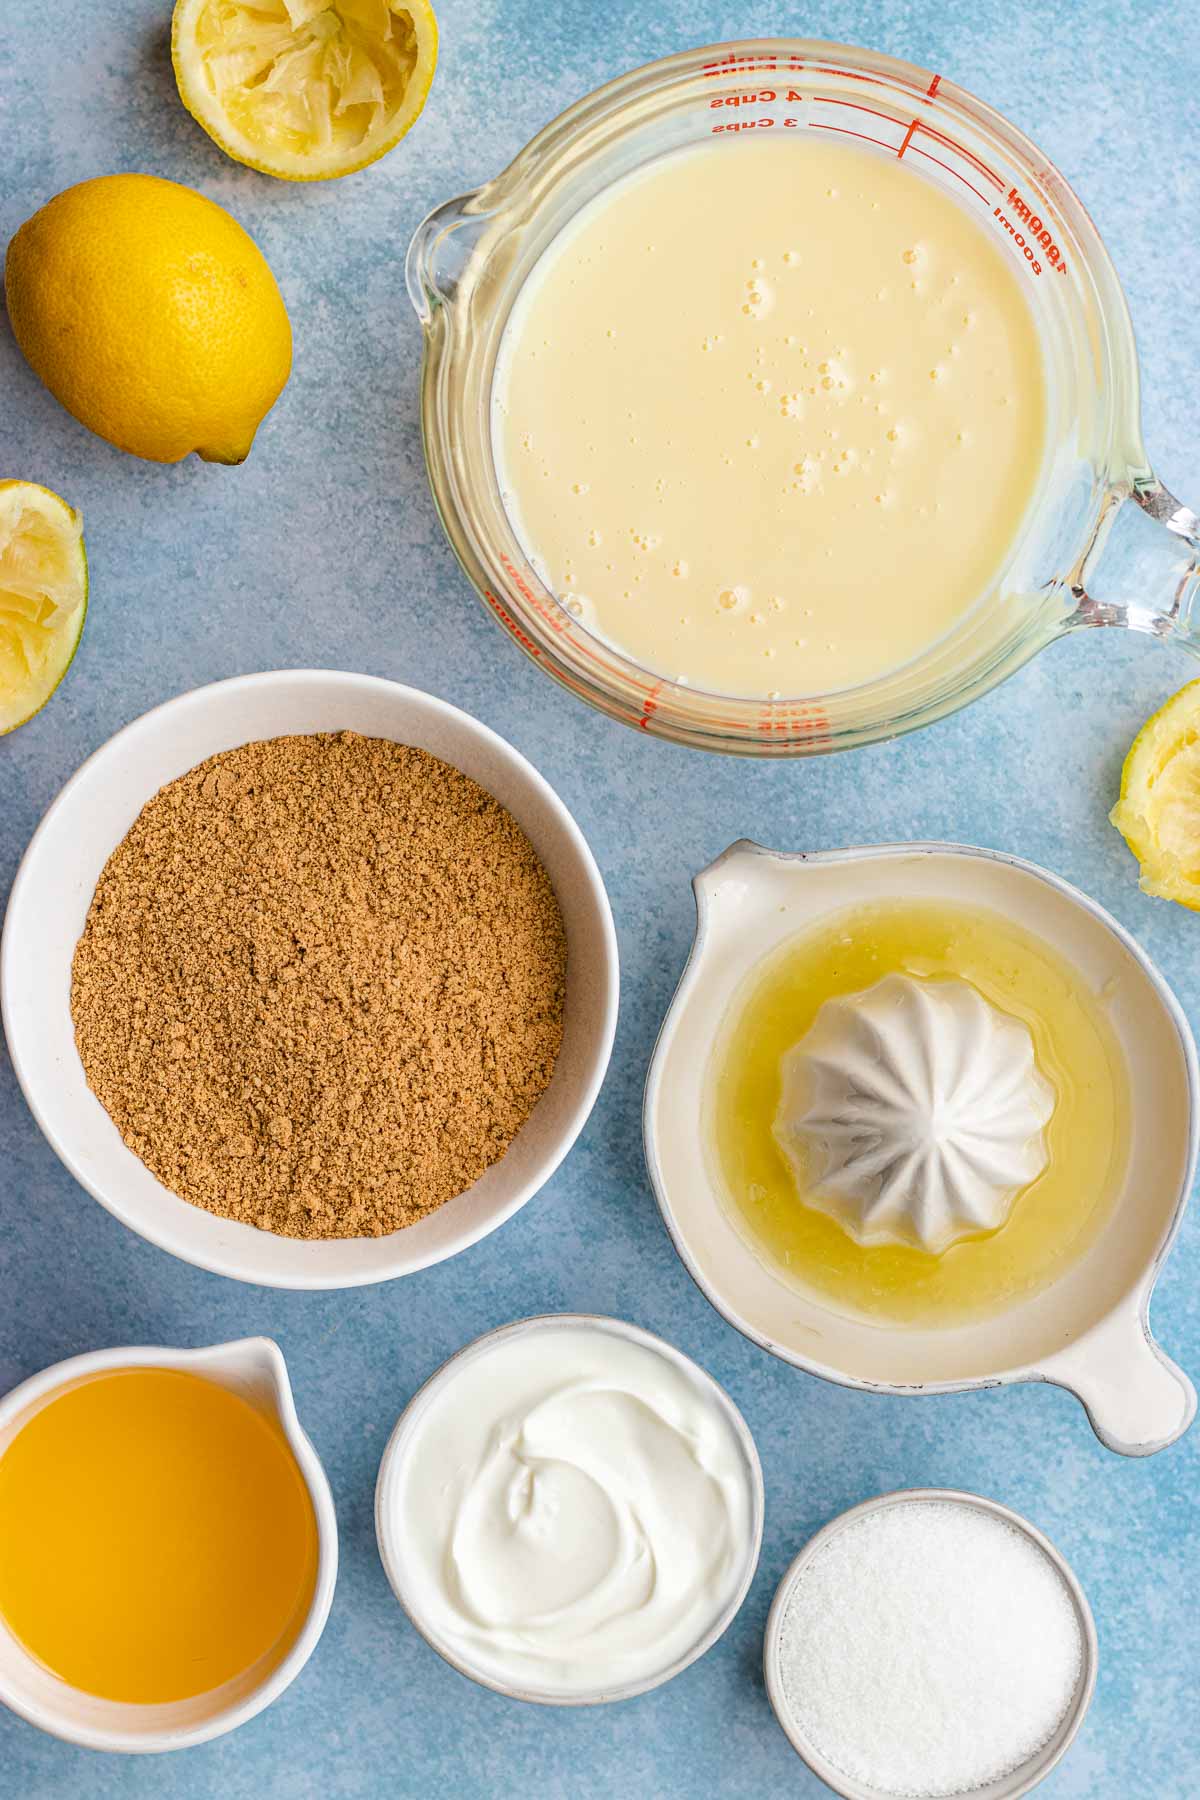 Lemon Pie ingredients laid out and in small bowls